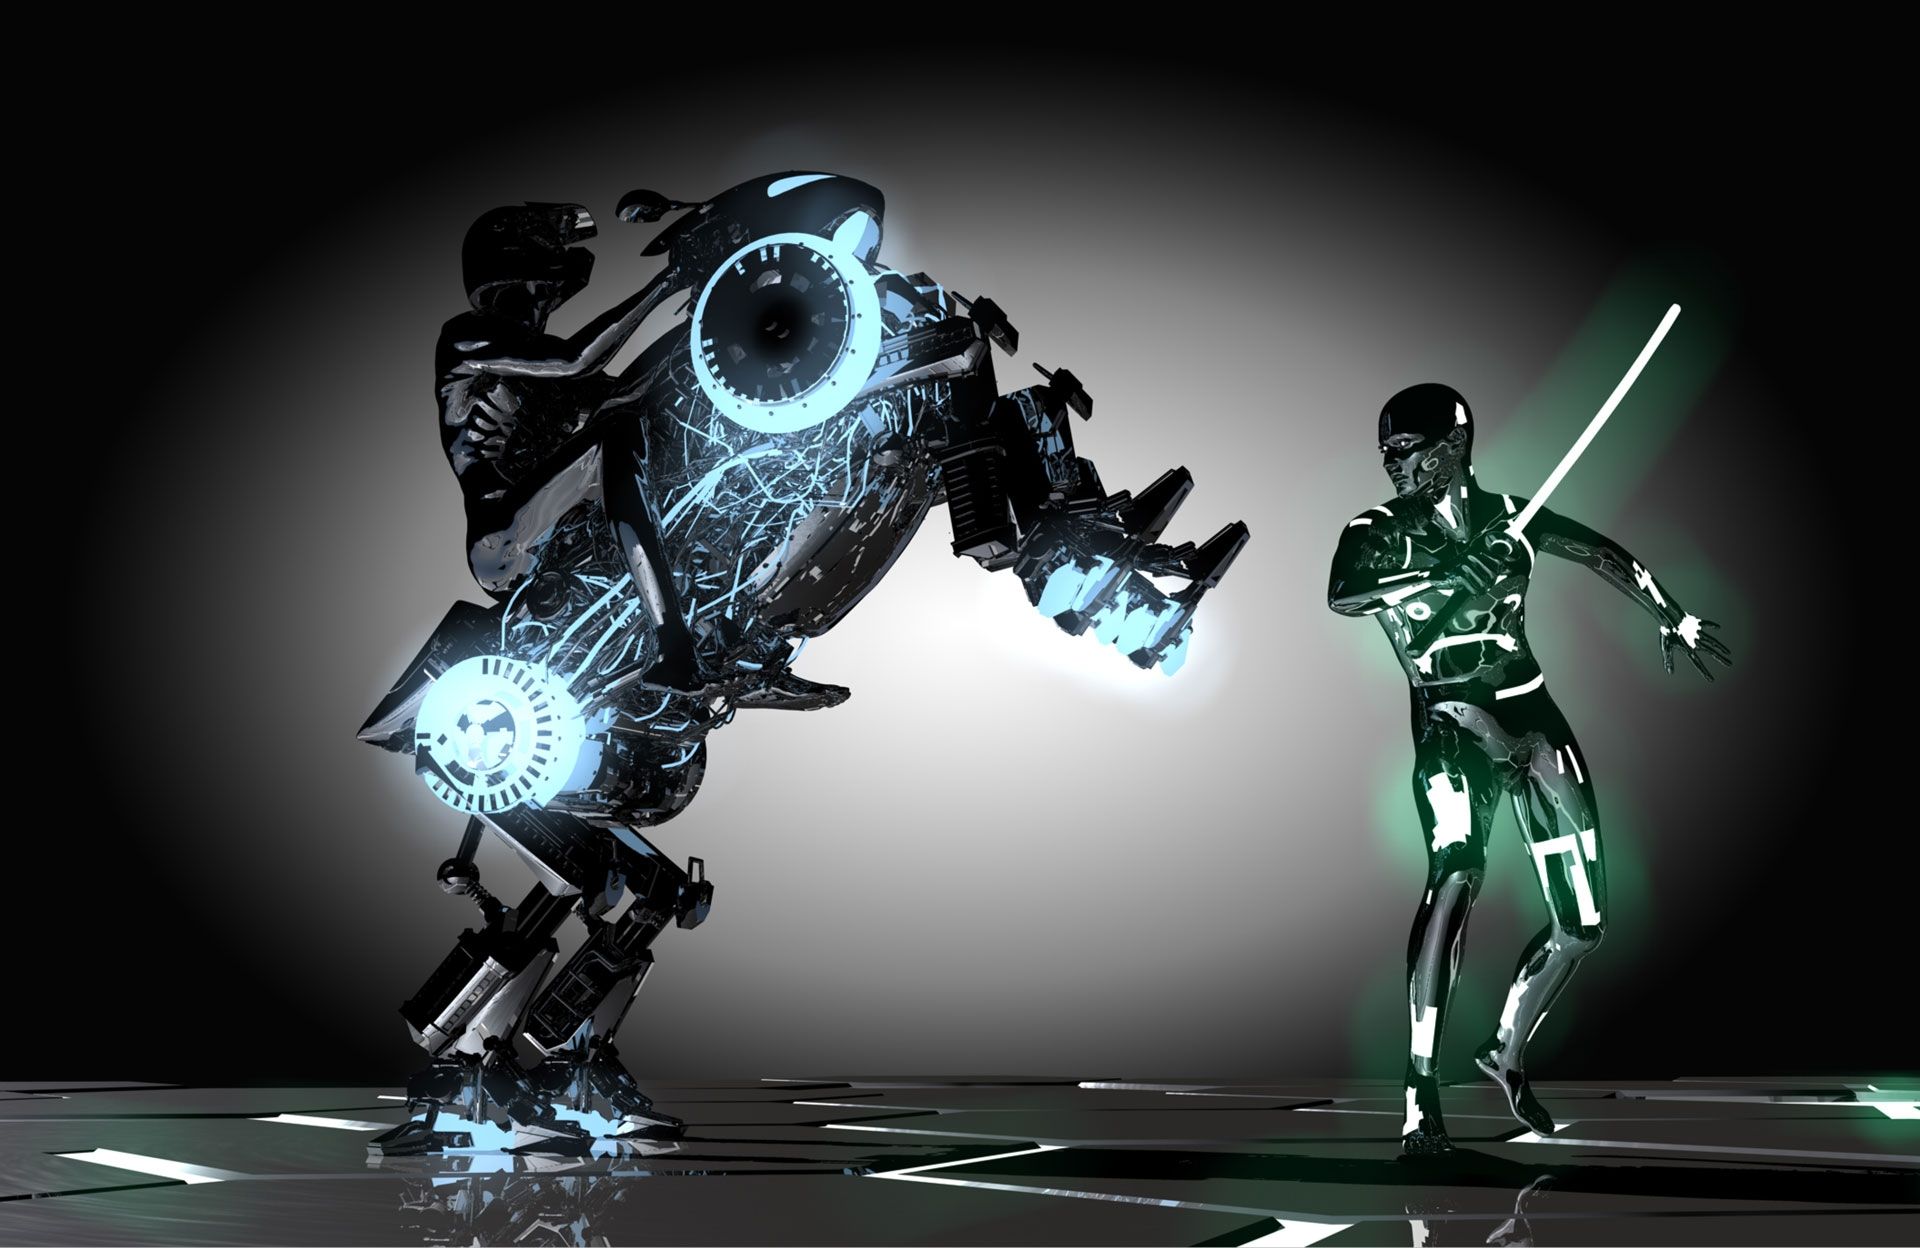 Two 3d game characters fighting made using CAD